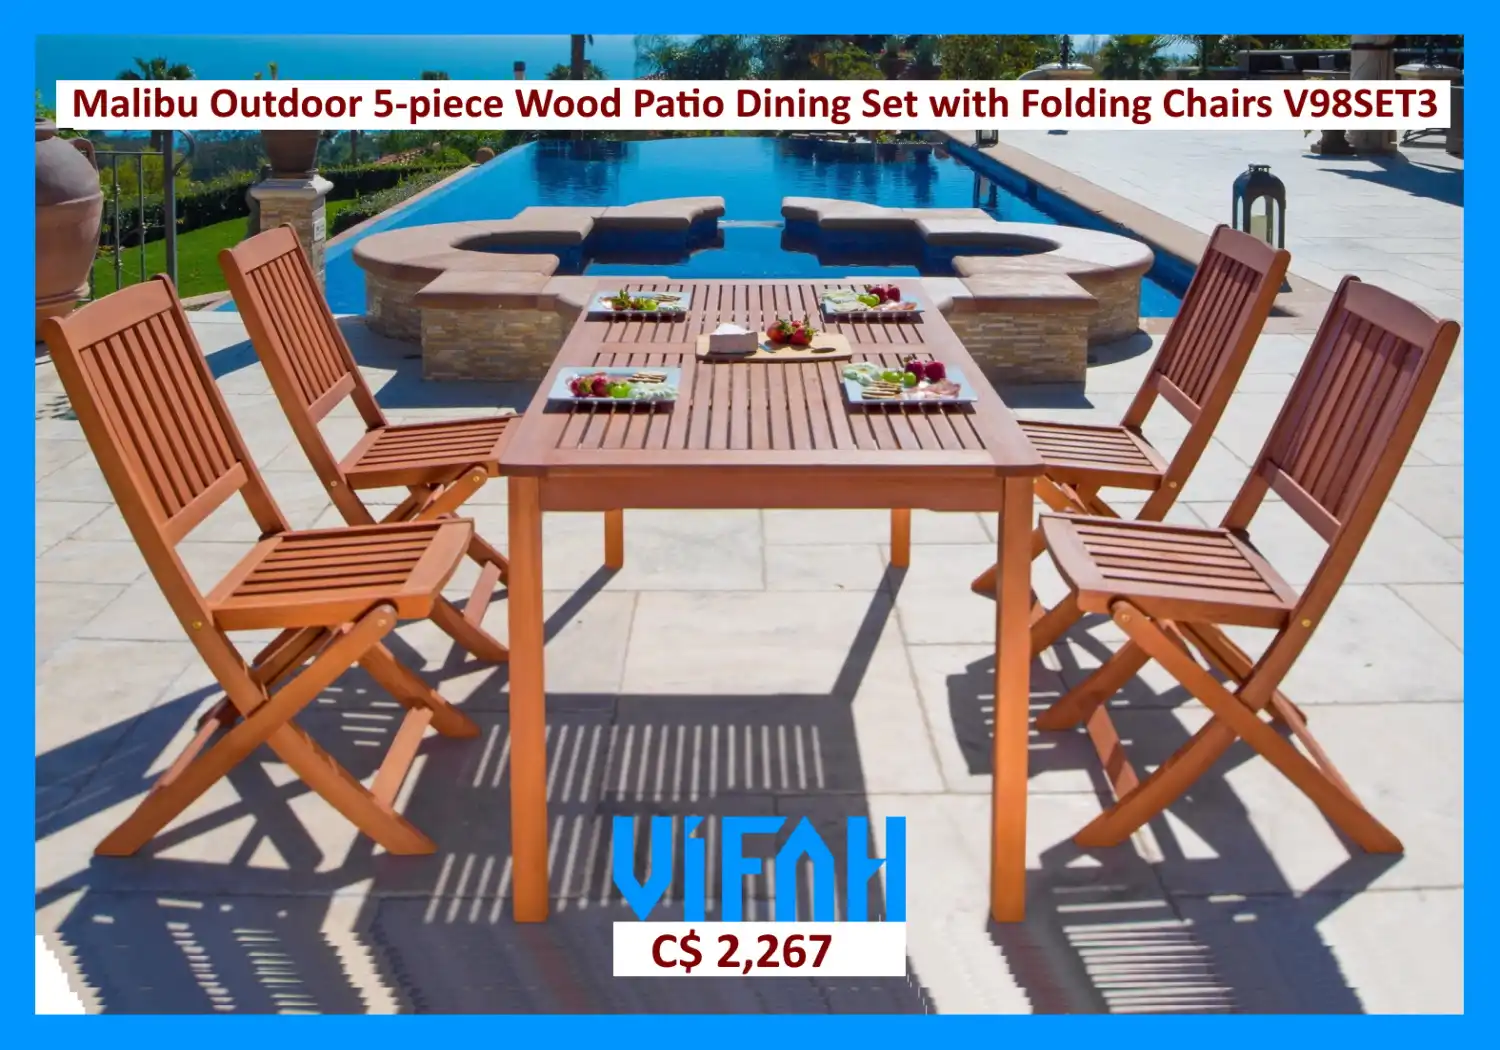 MALIBU Outdoor #V98SET3 5-piece Wood Patio Dining Set with Folding Chairs